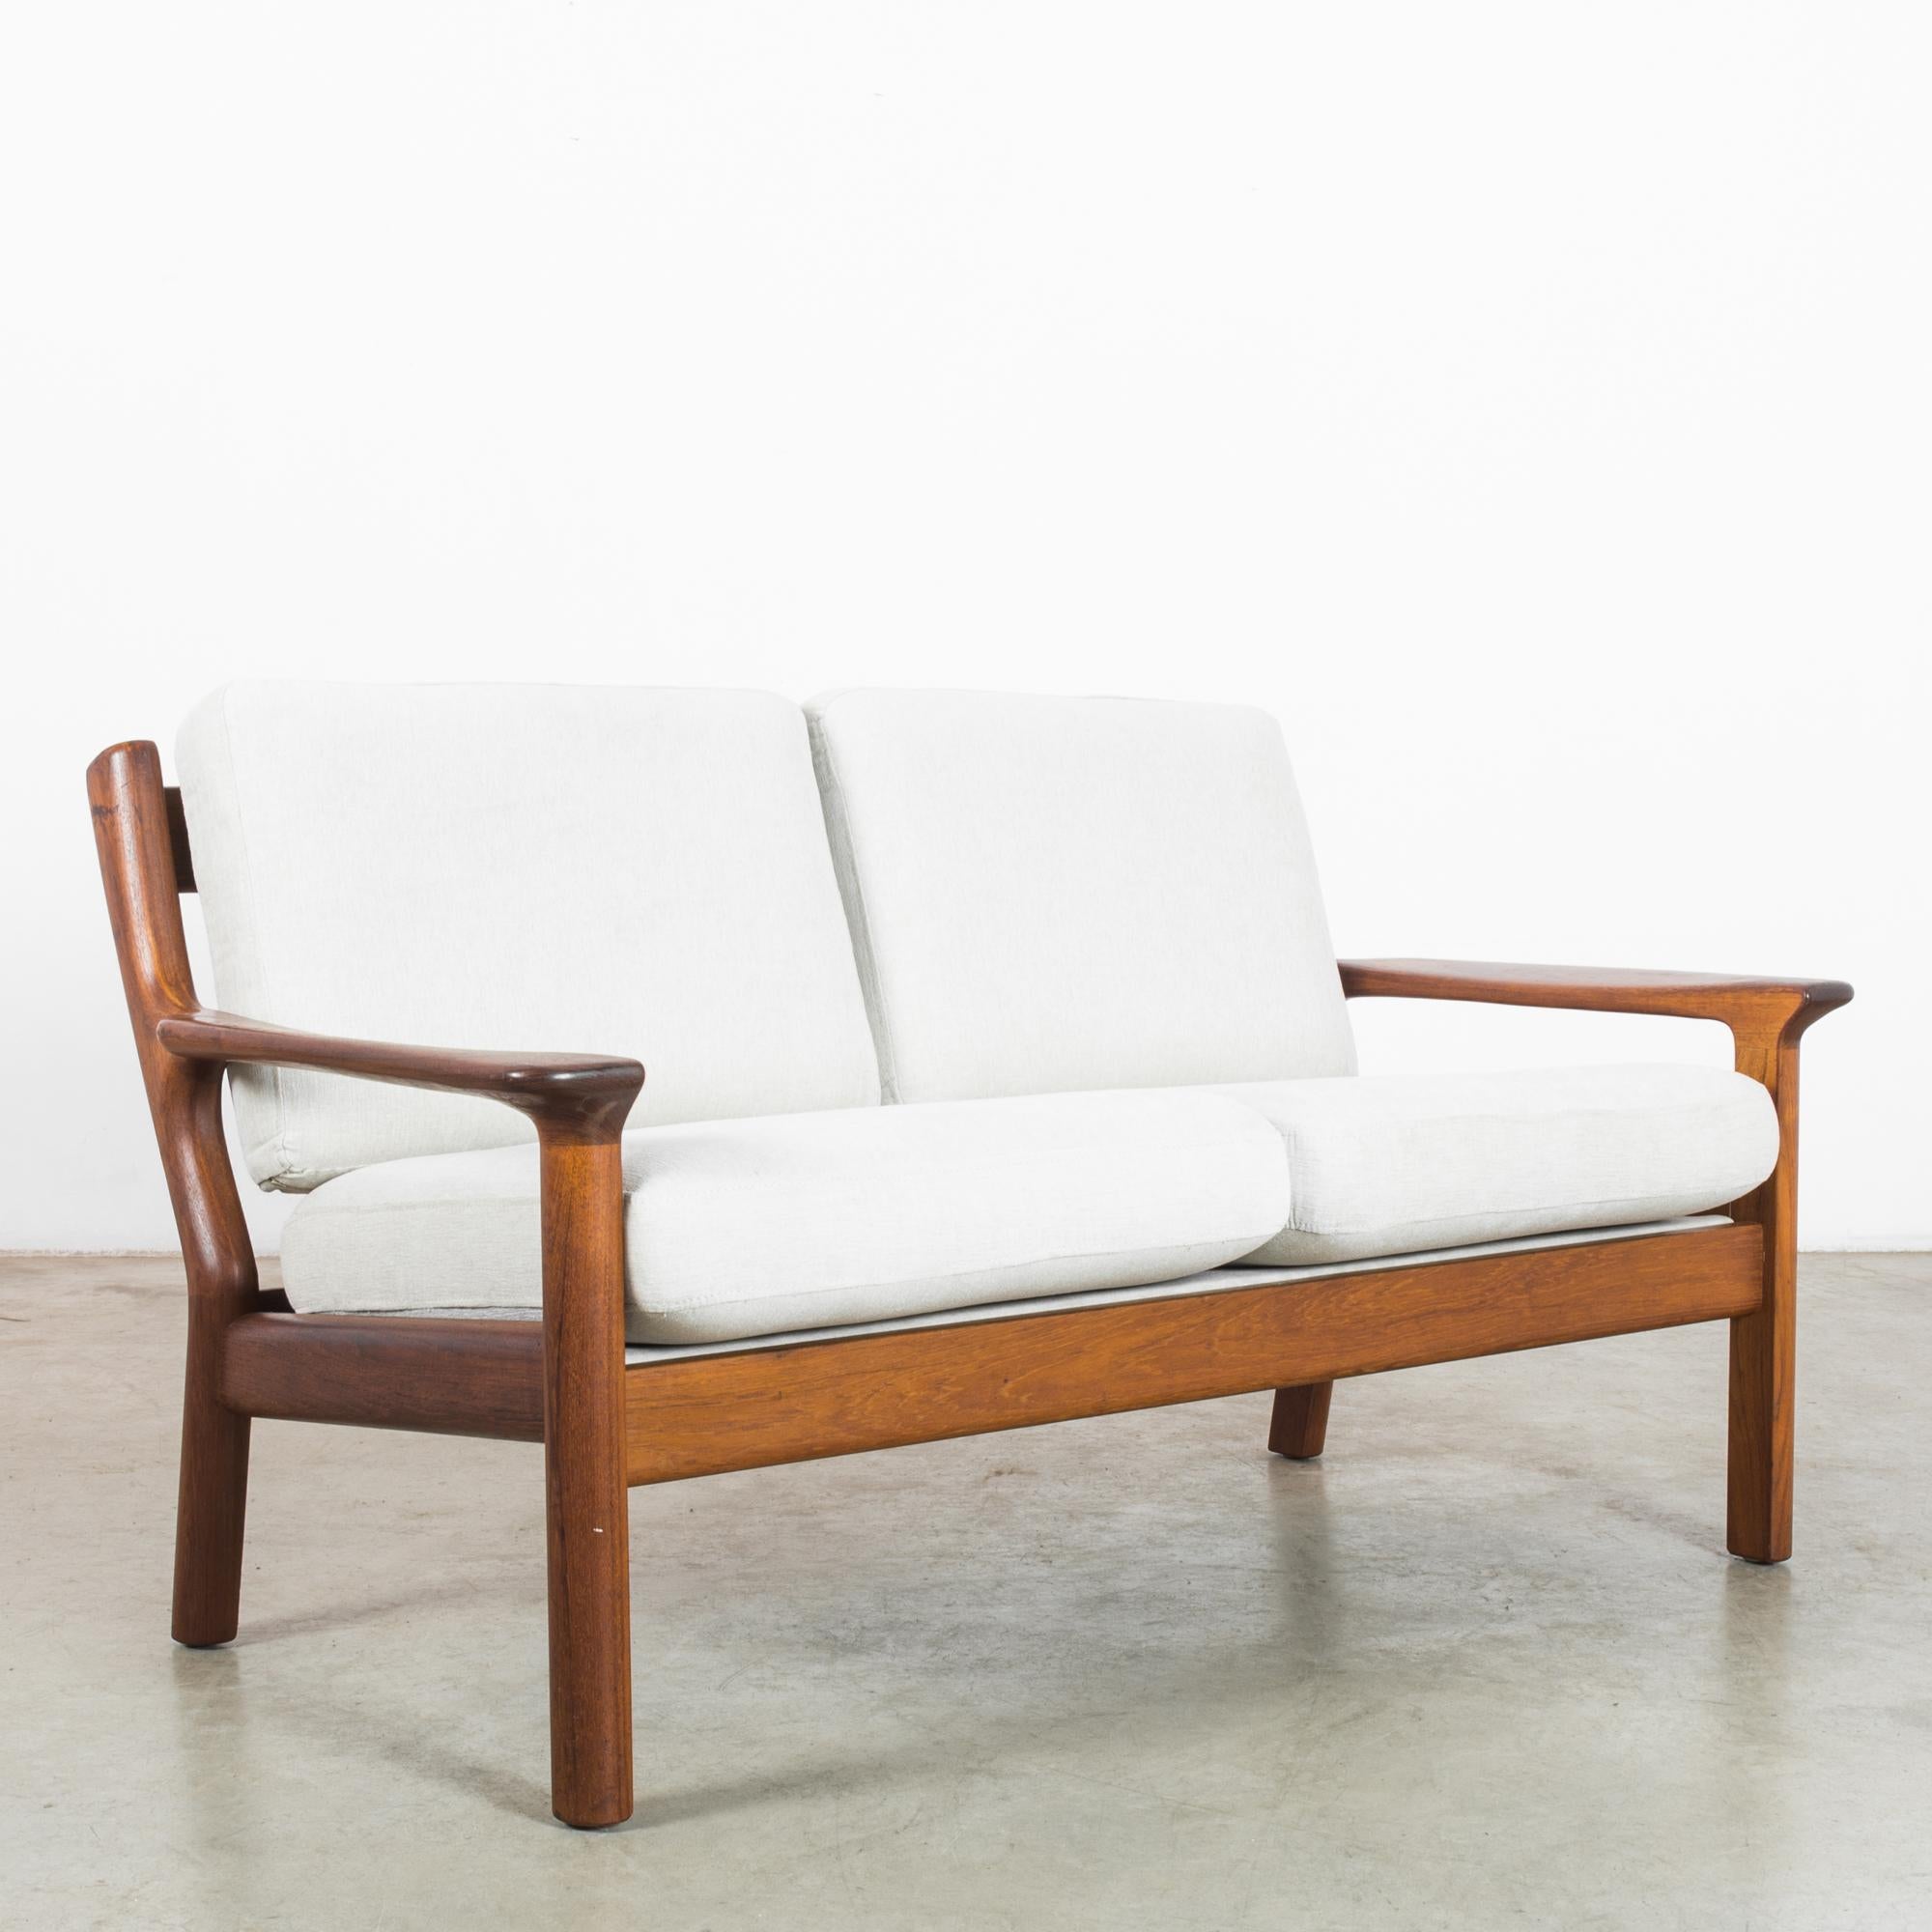 Dive into the Danish modern movement with this sleek 1960s teak sofa that effortlessly marries form and function. Its clean lines and warm teak frame echo the minimalist aesthetic that Danish design is celebrated for. The sofa's frame features